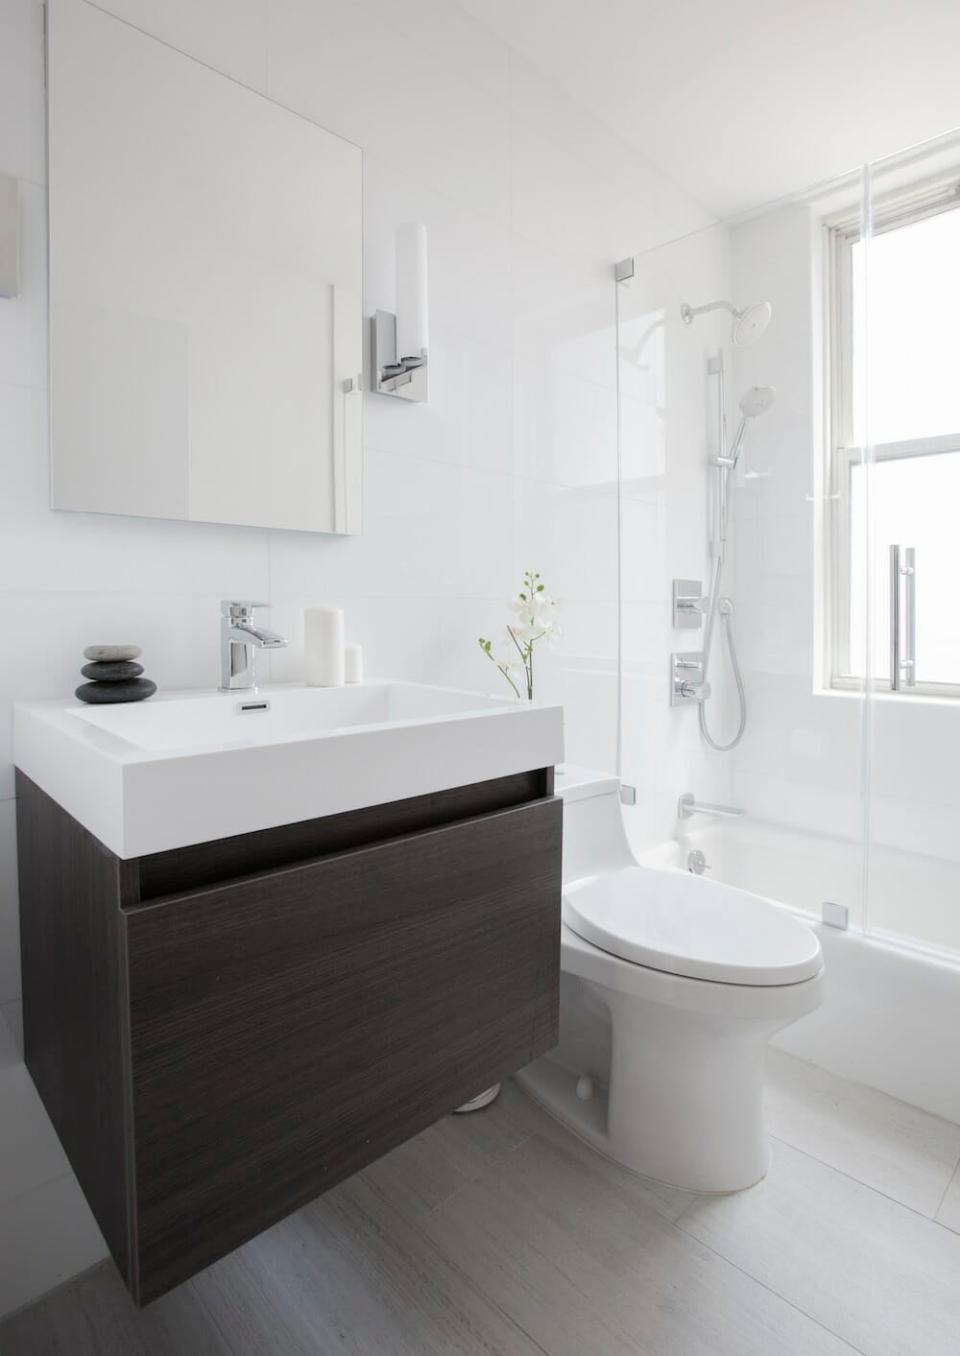 A small white bathroom with a wooden vanity under a white porcelain sink.